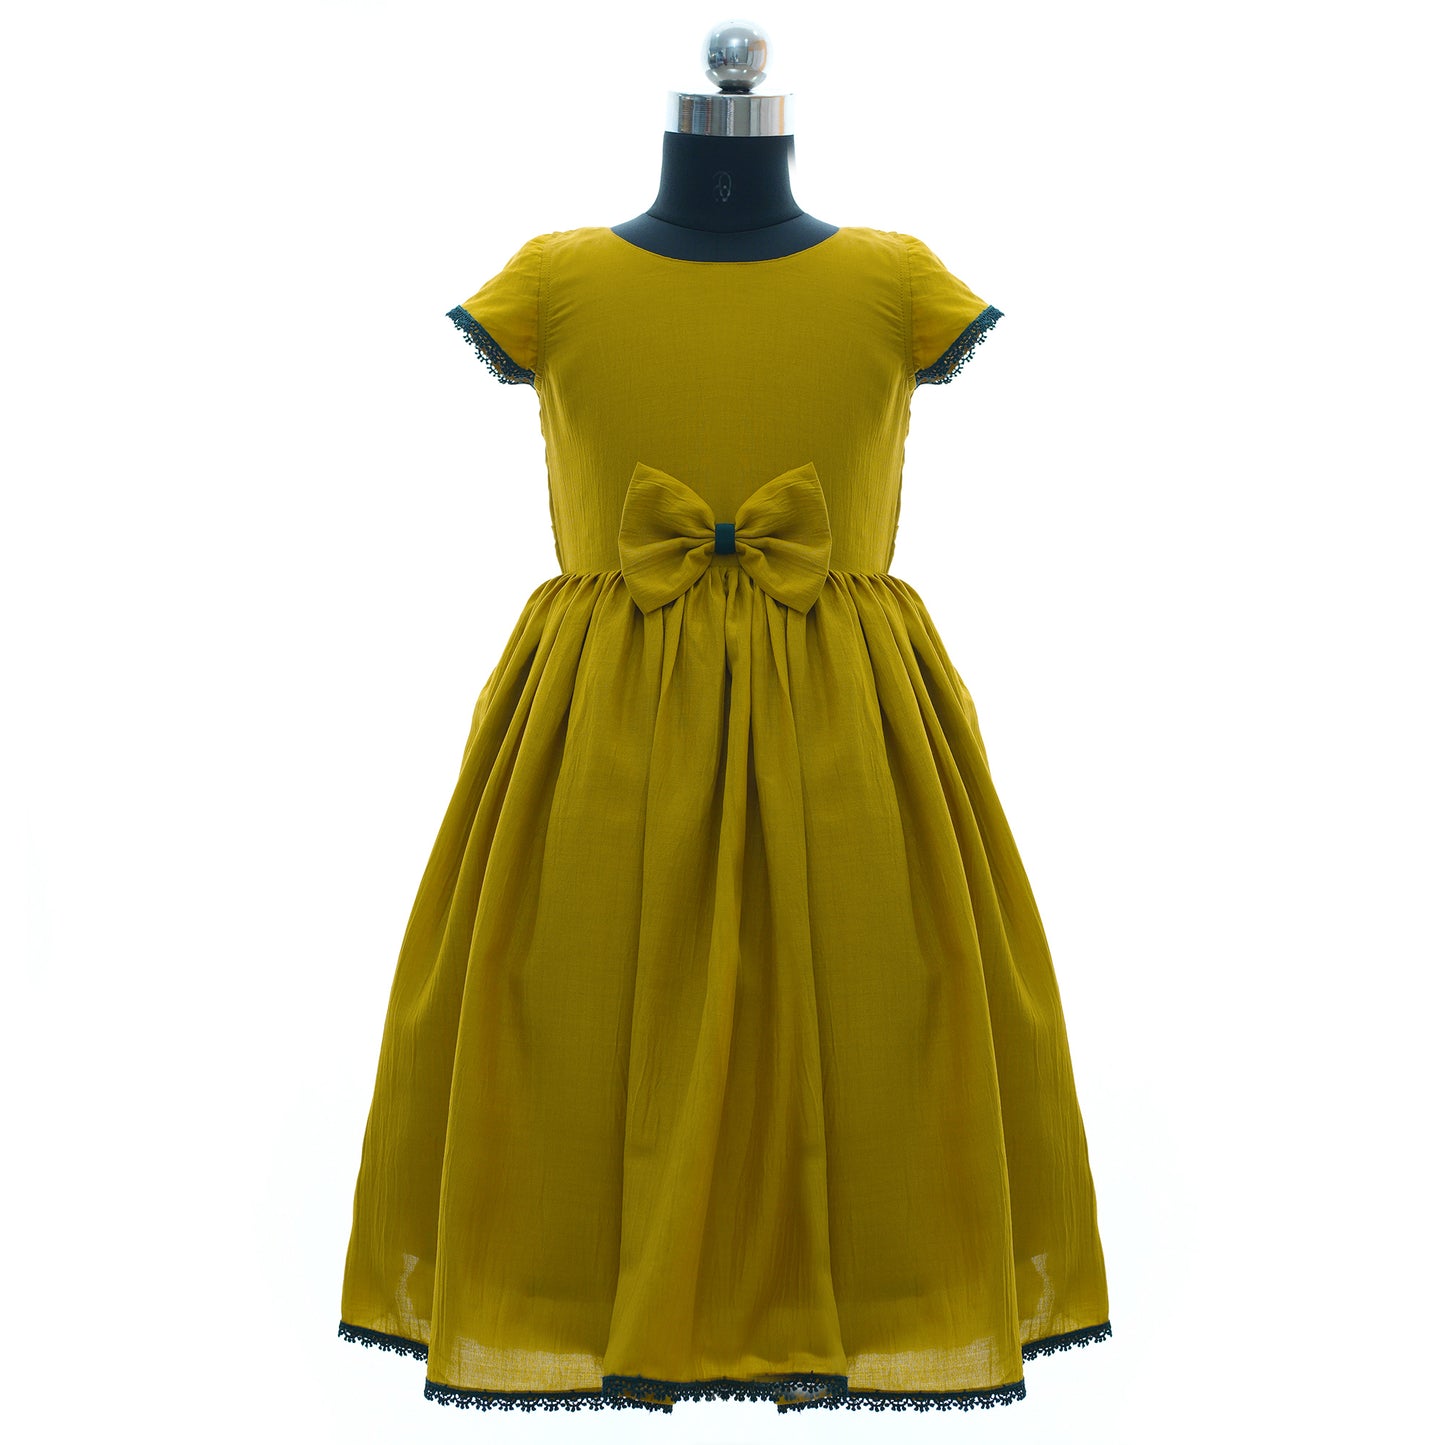 New fashion frock for kids, unique designer dresses stylish comfortable collection baby girl dresses yellow party frock 2023 bacchon ki dress 3 years old kids clothing stores online shopping India